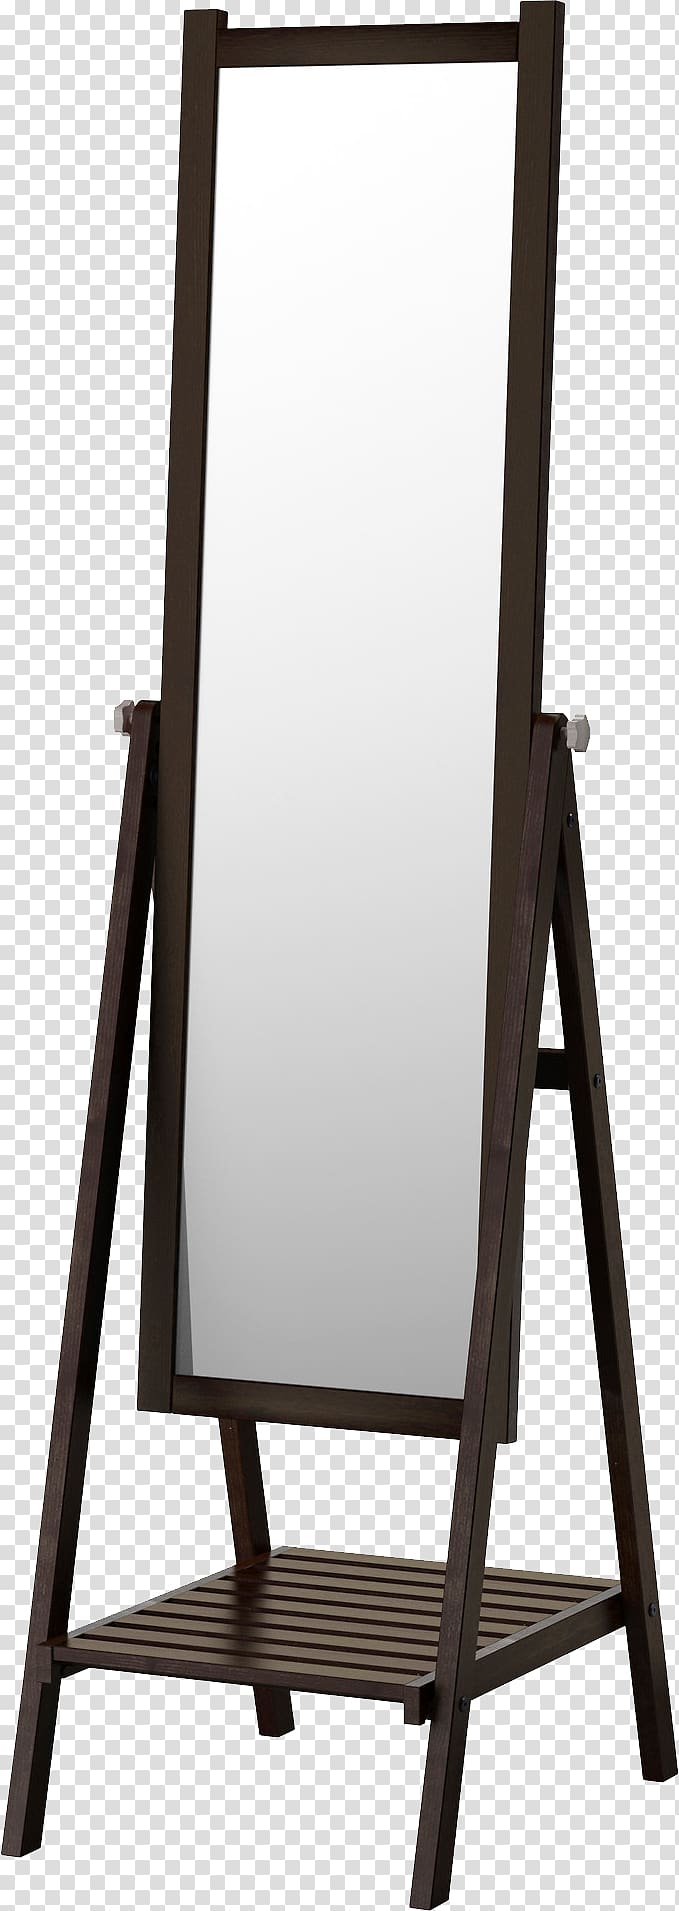 Mirror transparent background PNG clipart